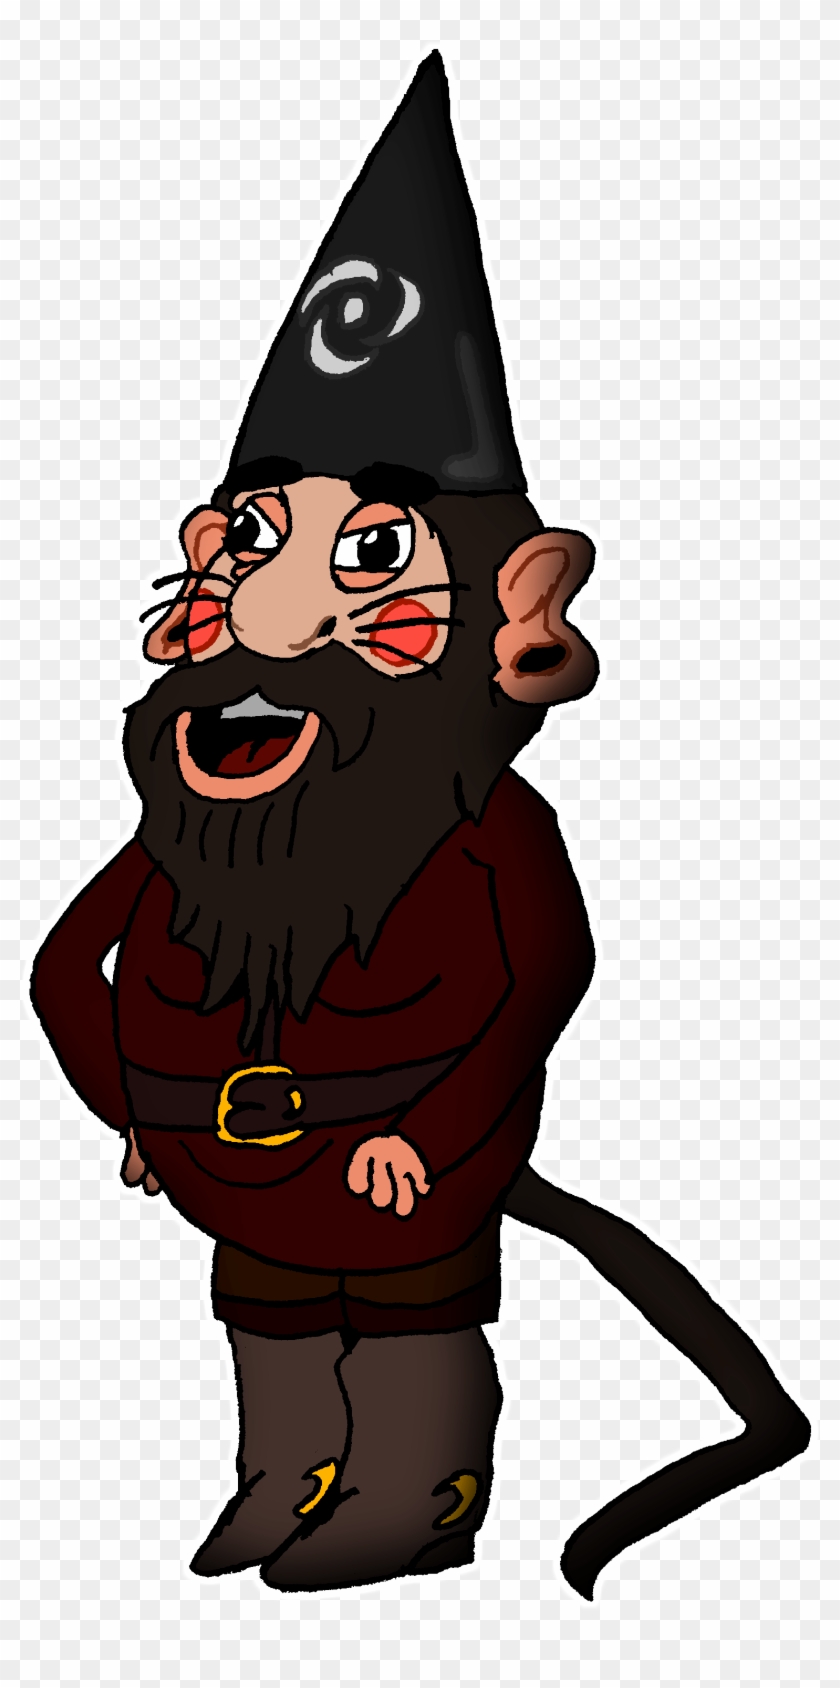 Keemstar Gnome Png - Illustration Clipart #3991938